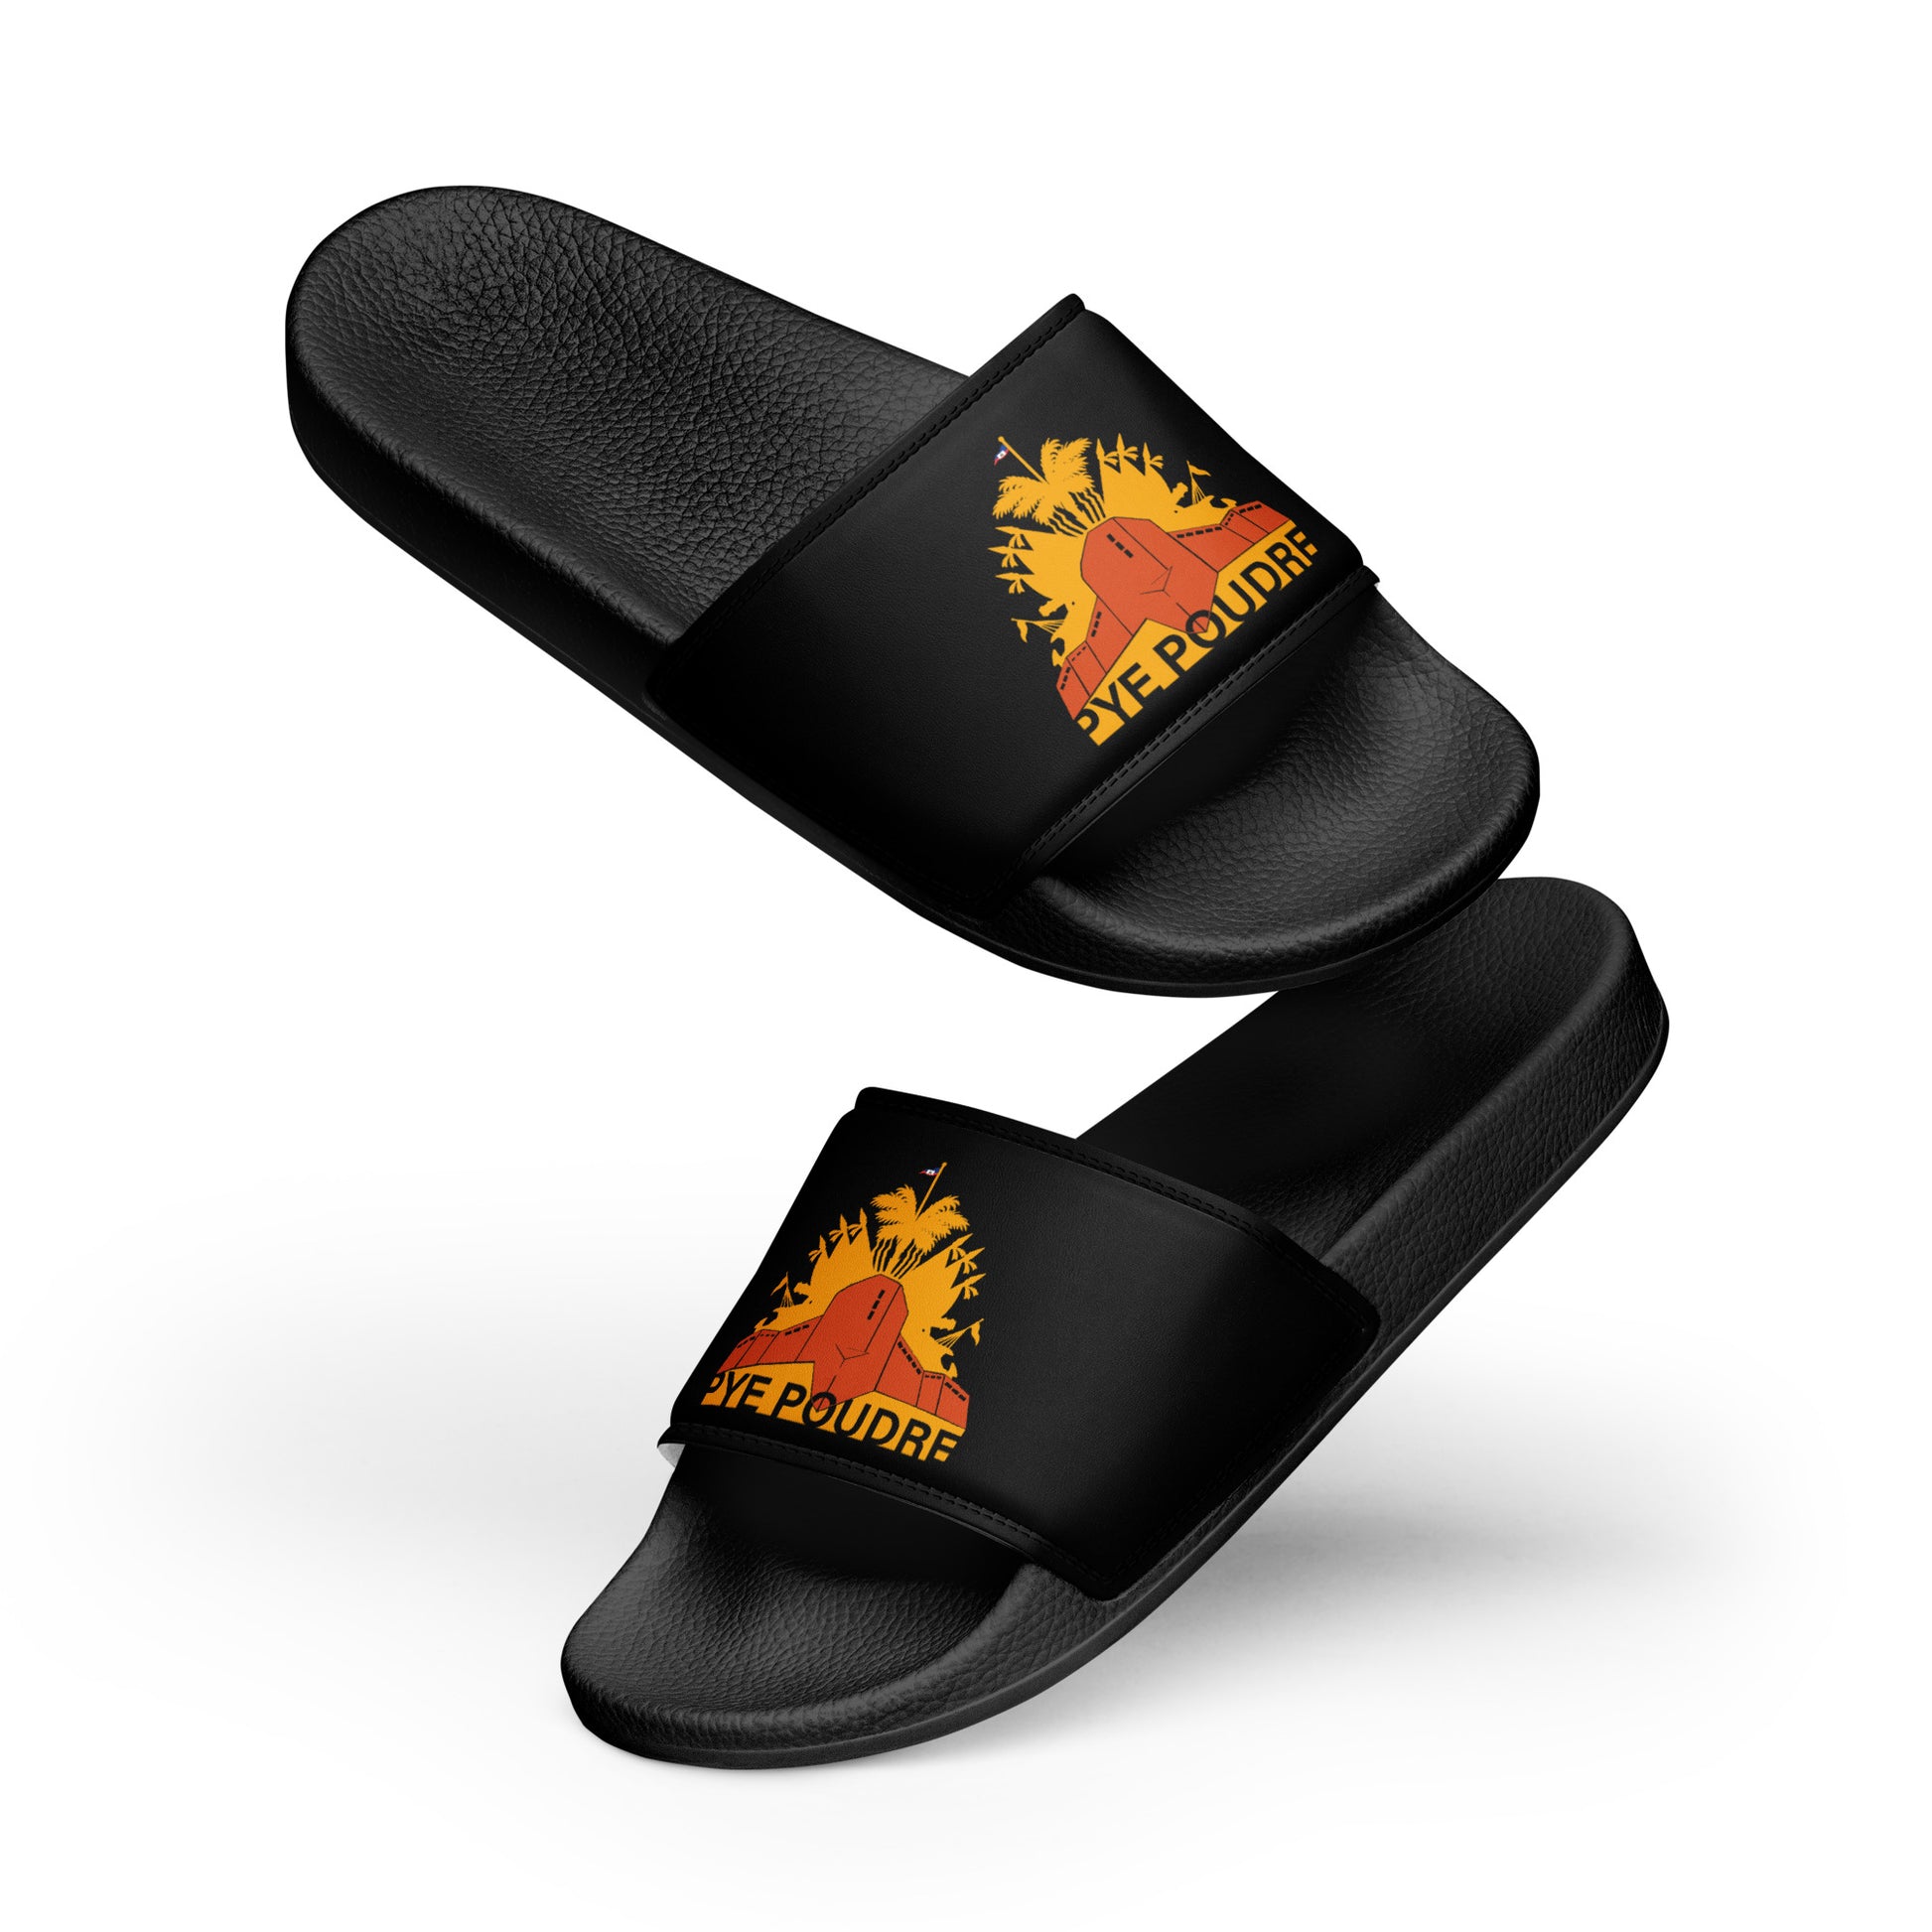 men's-slides-black-slides-theo gallery expo-theo photography